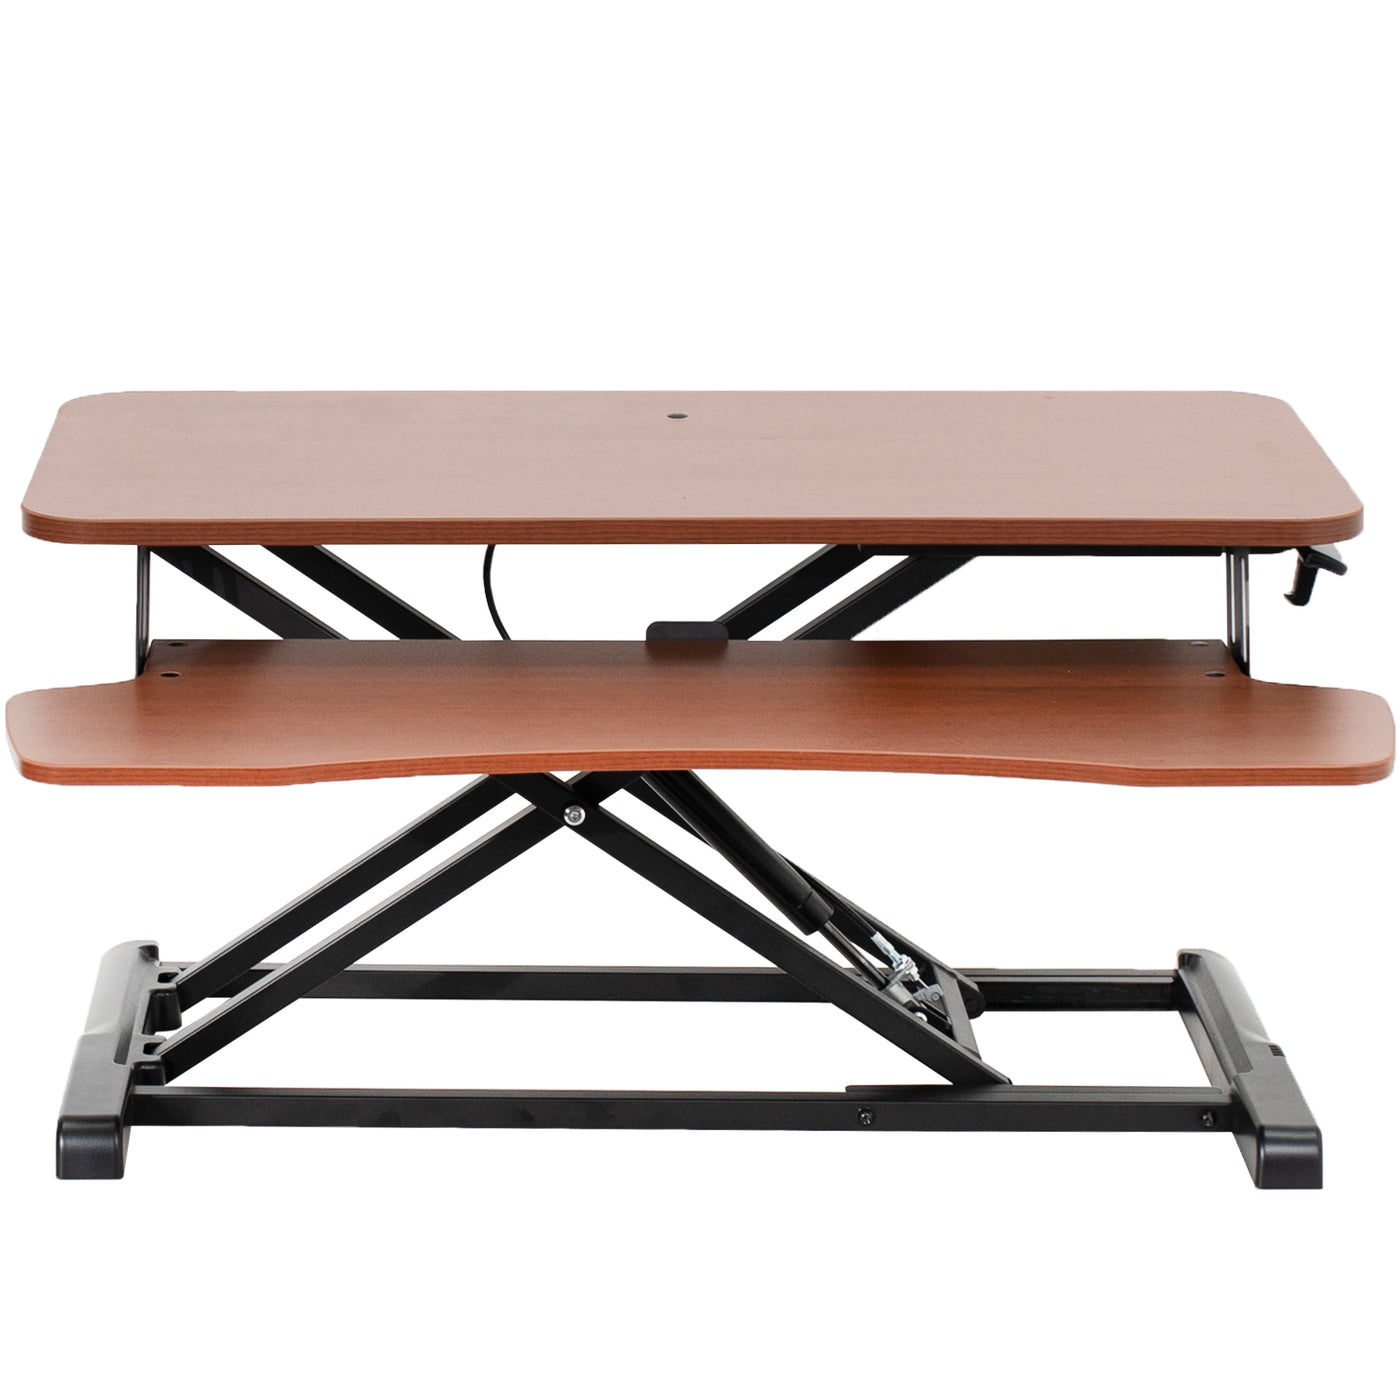 Adjustable sit-to-stand table-top desk riser. 